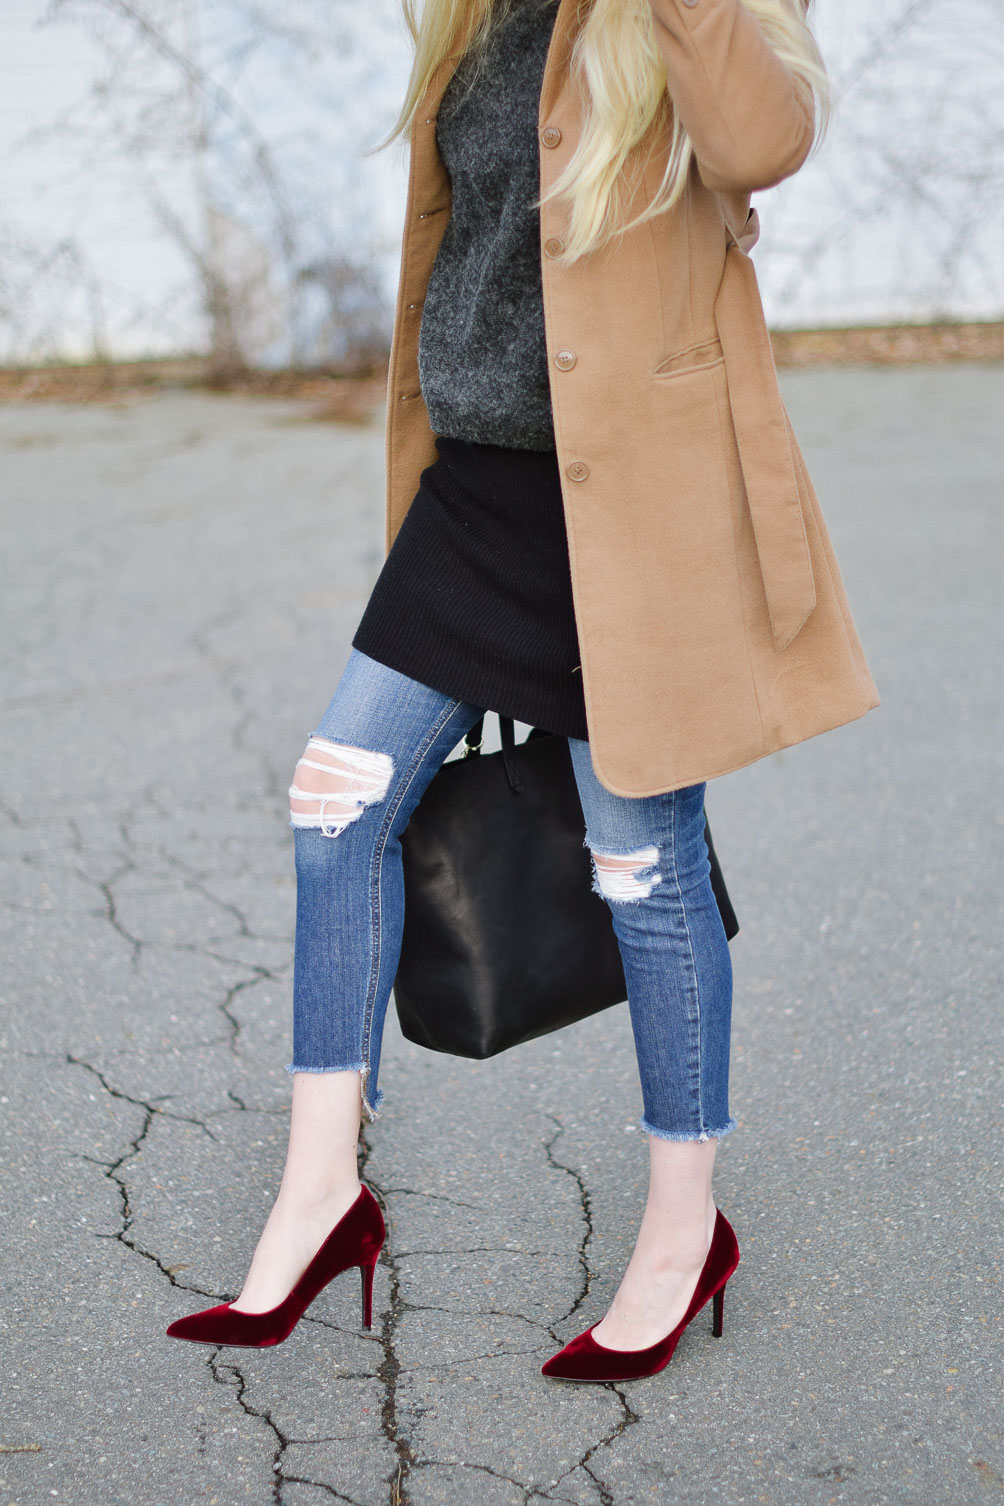 styling a layered winter outfit with this camel coat, chunky sweater, distressed denim, and velvet pumps